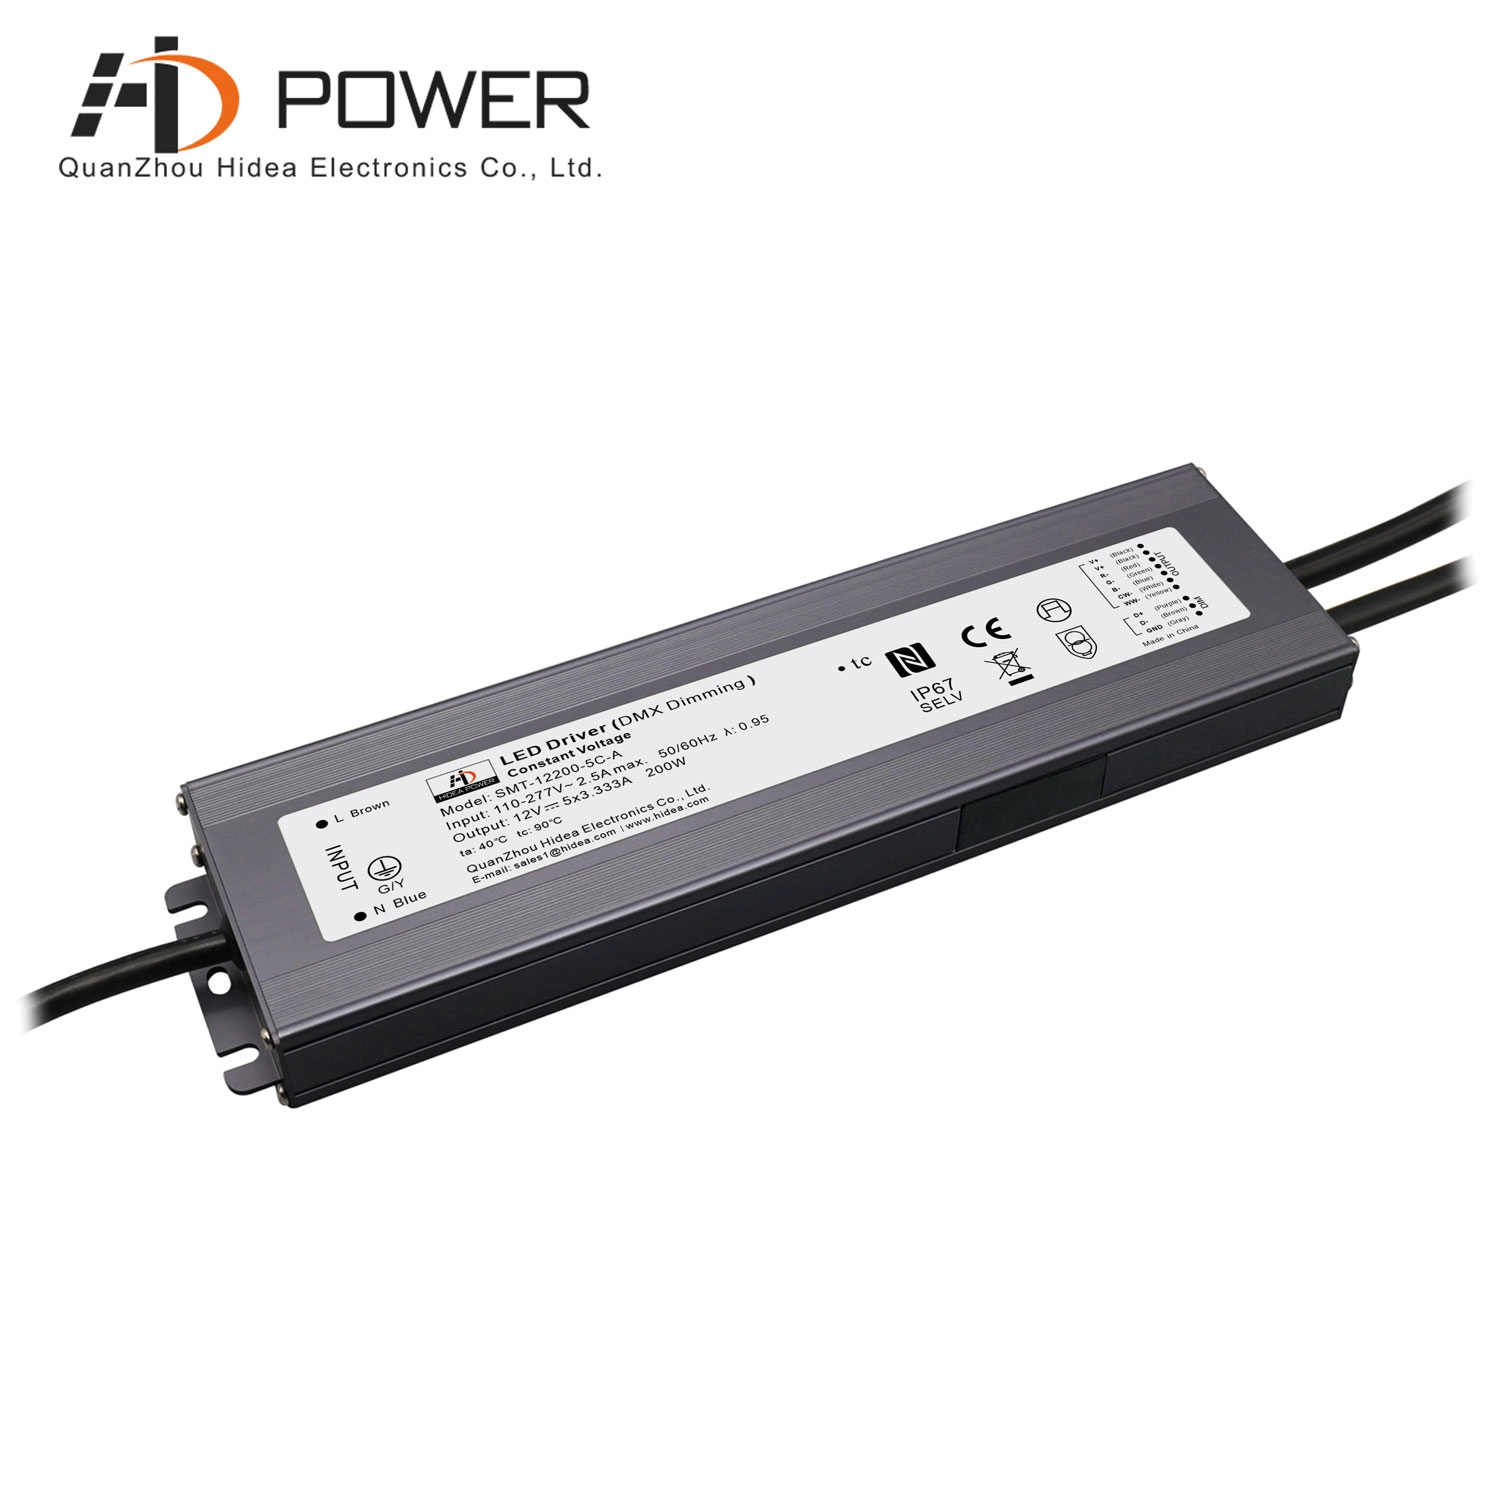 200w 12 volt led DMX dimmable transformer for RGBCW